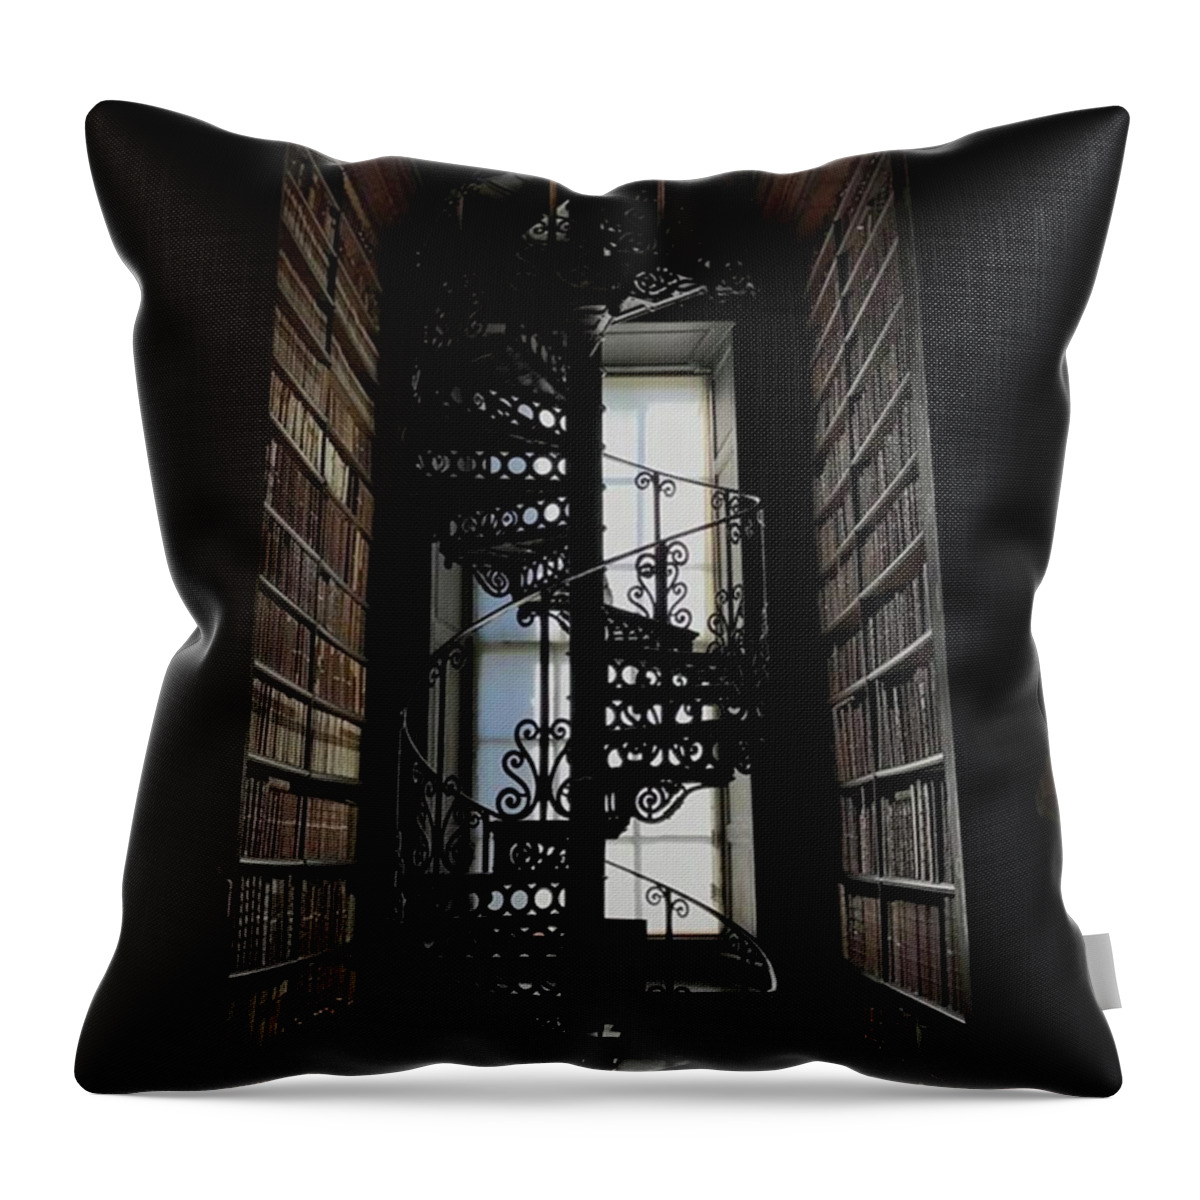  Throw Pillow featuring the photograph Hello, I Live Here Now by Katie Cupcakes